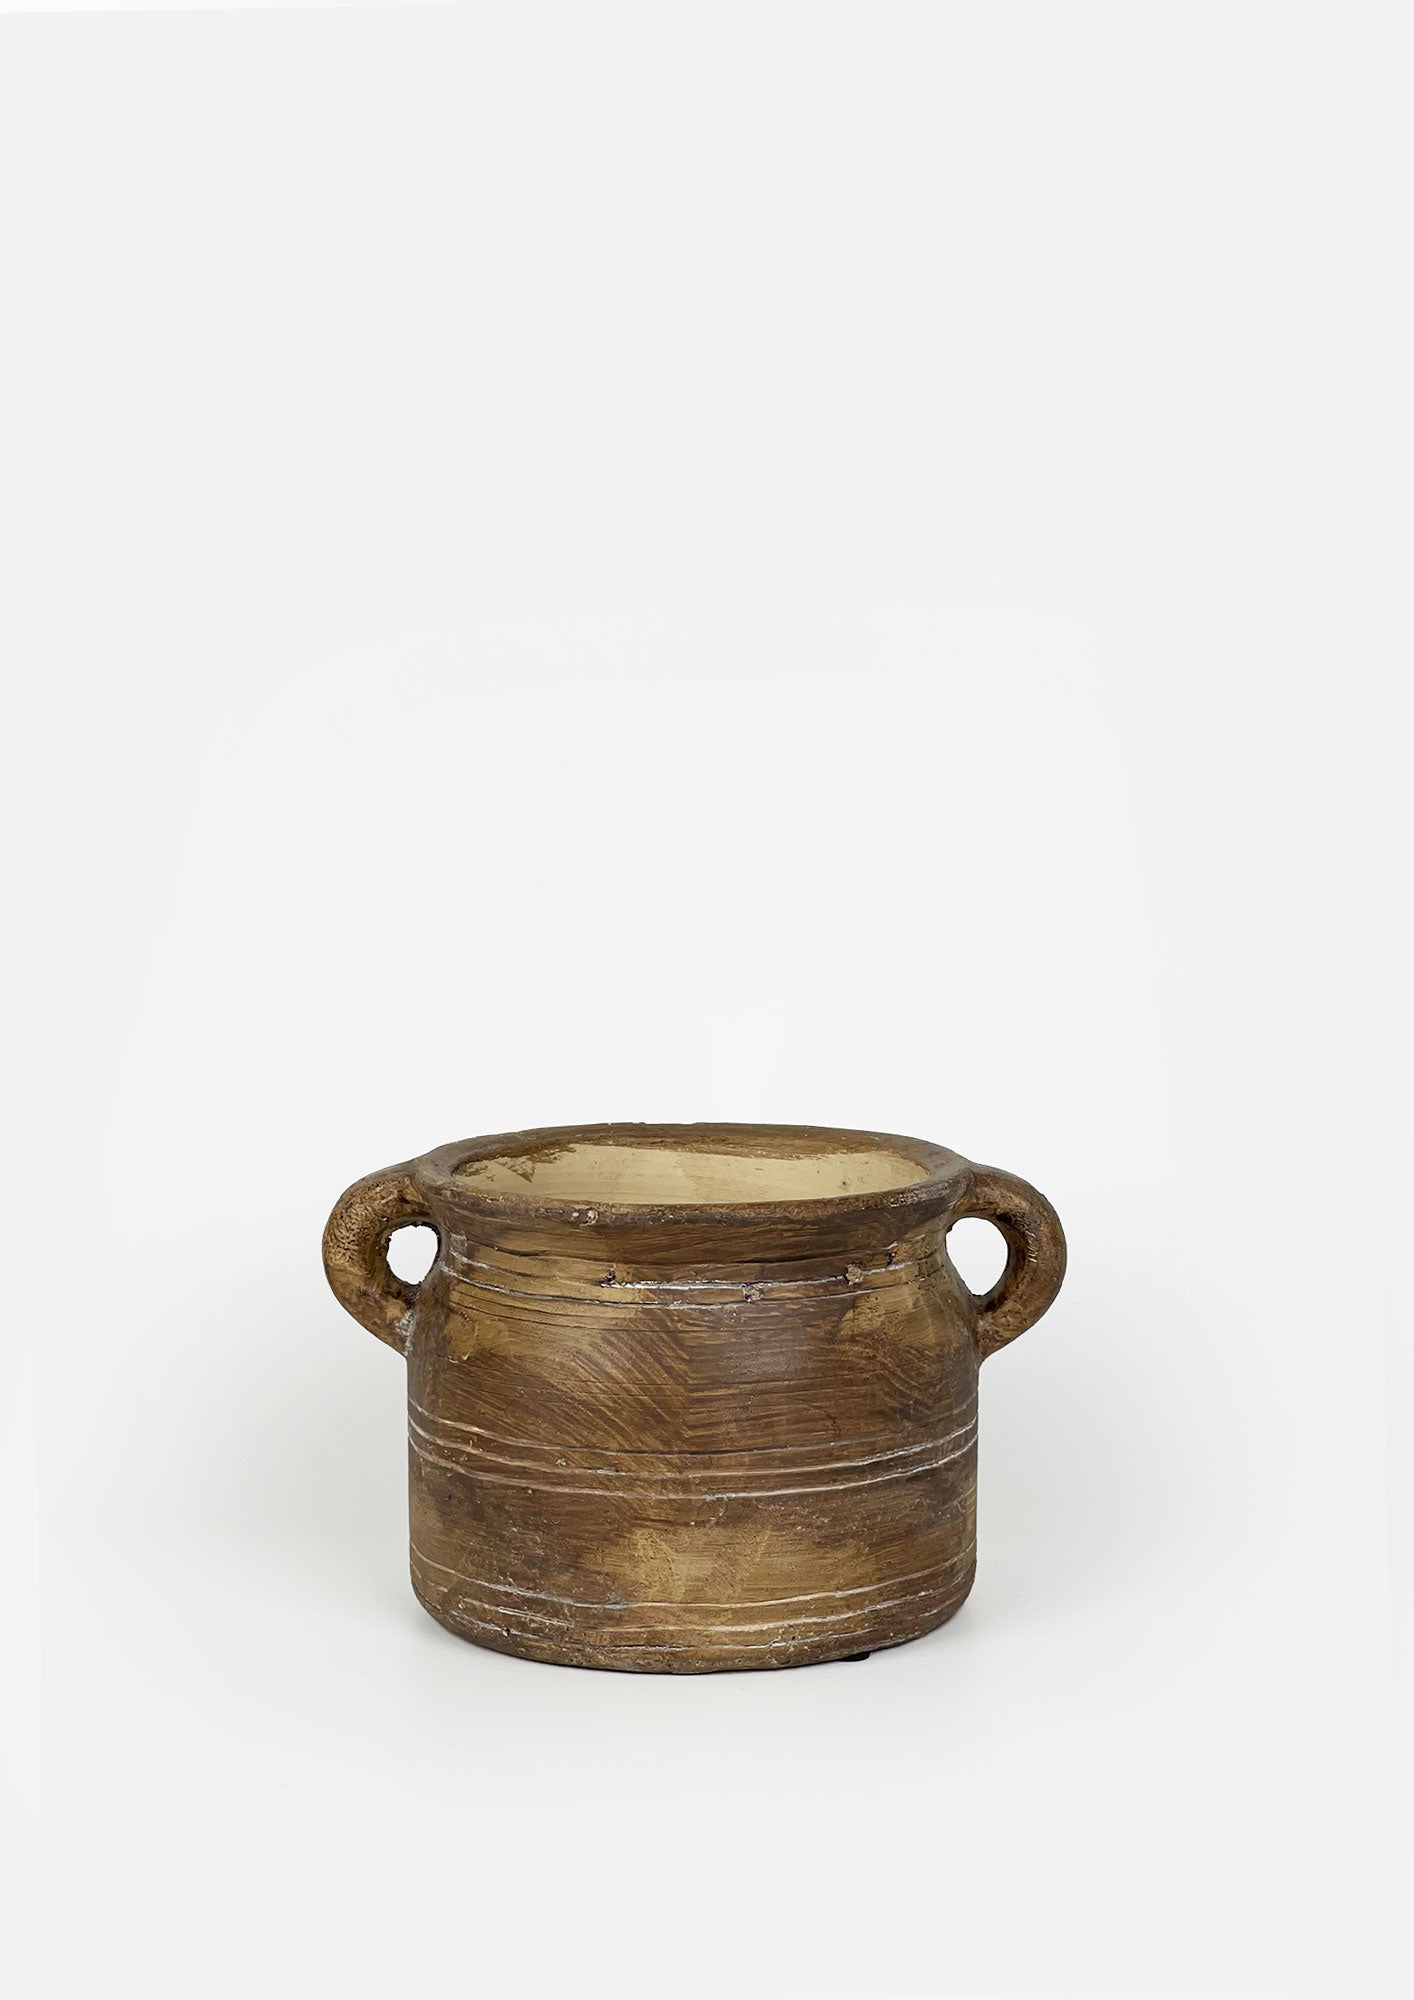 Vessel with Handles